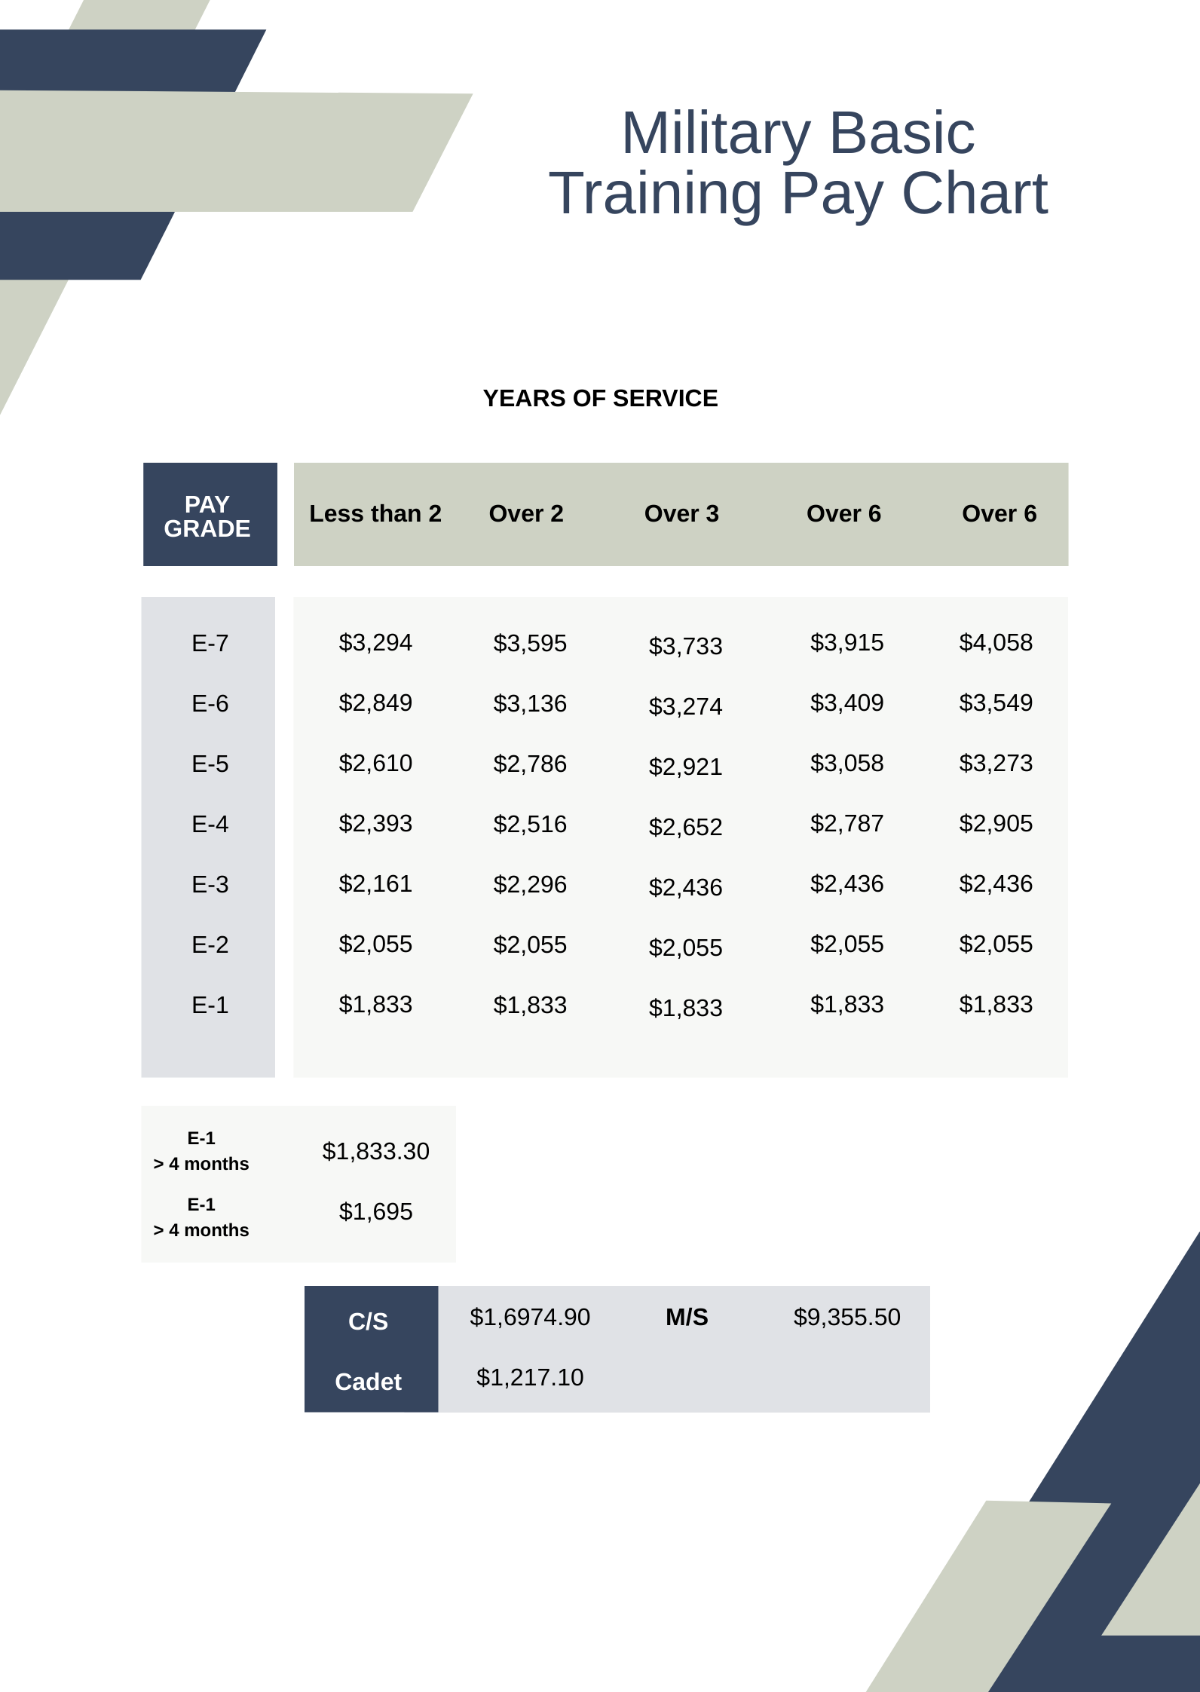 Military Basic Training Pay Chart Template